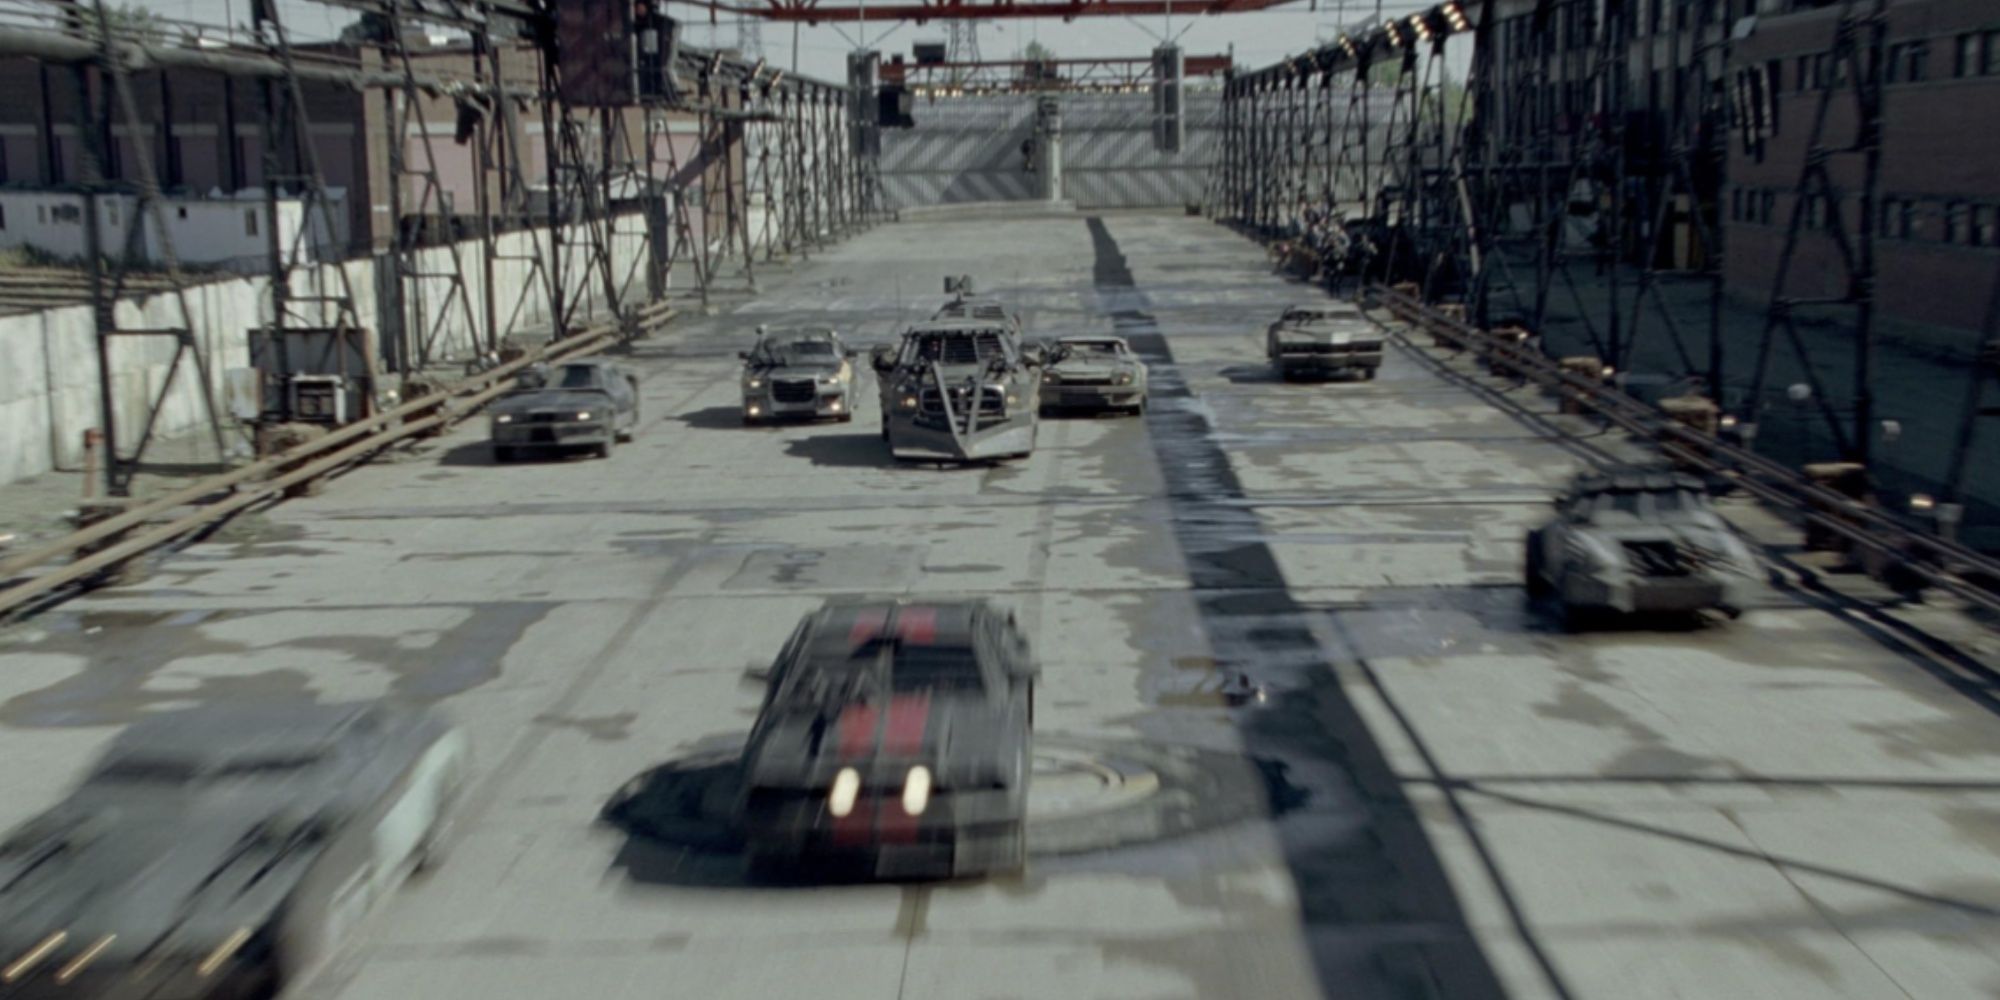 A series of cars competing in the prison's Death Race, with the car leading in front driving over a weapons system button.